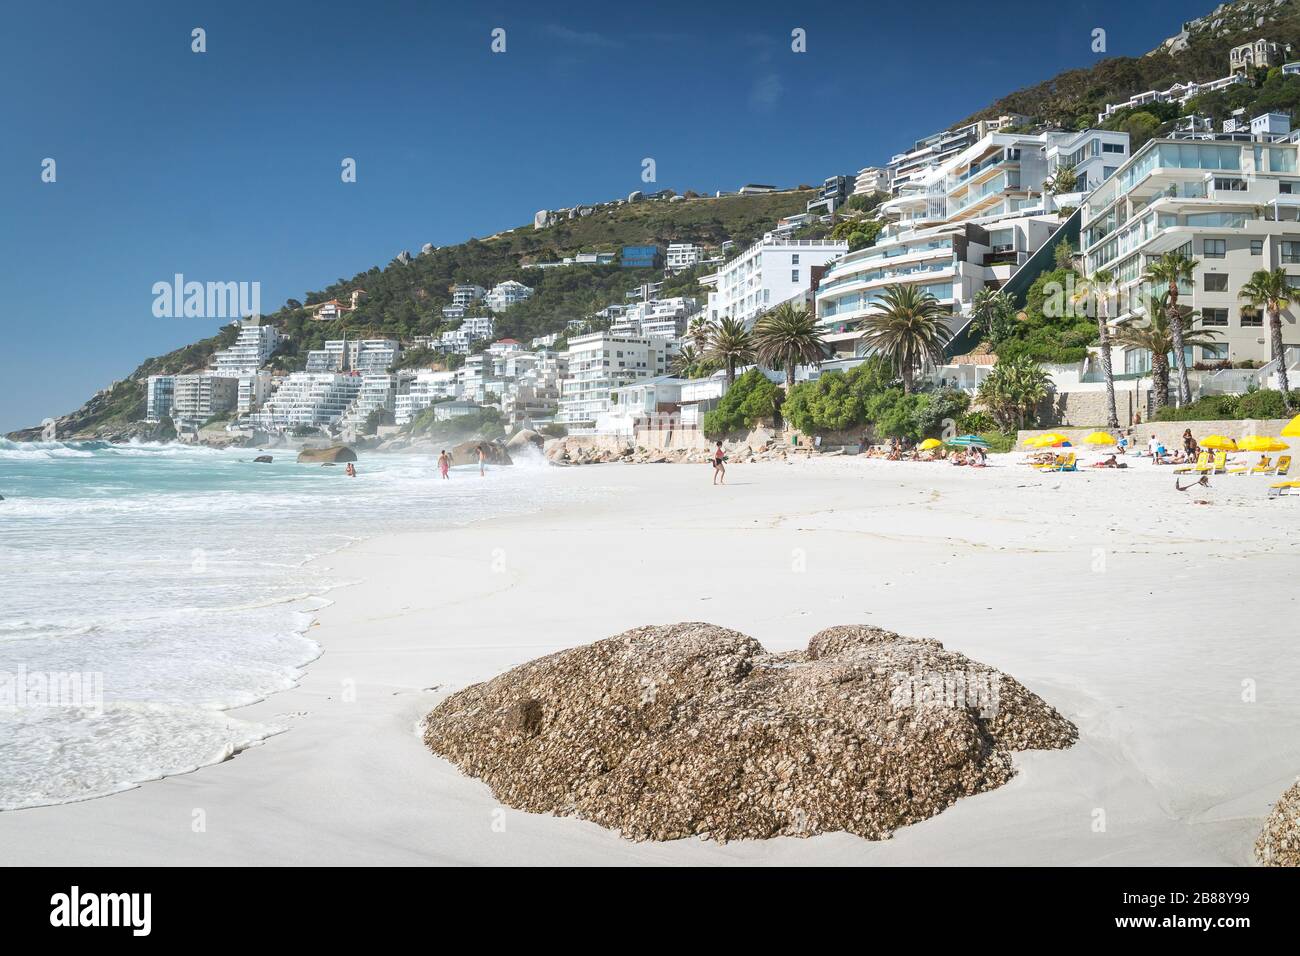 Page 6 - Clifton Beach High Resolution Stock Photography and Images - Alamy